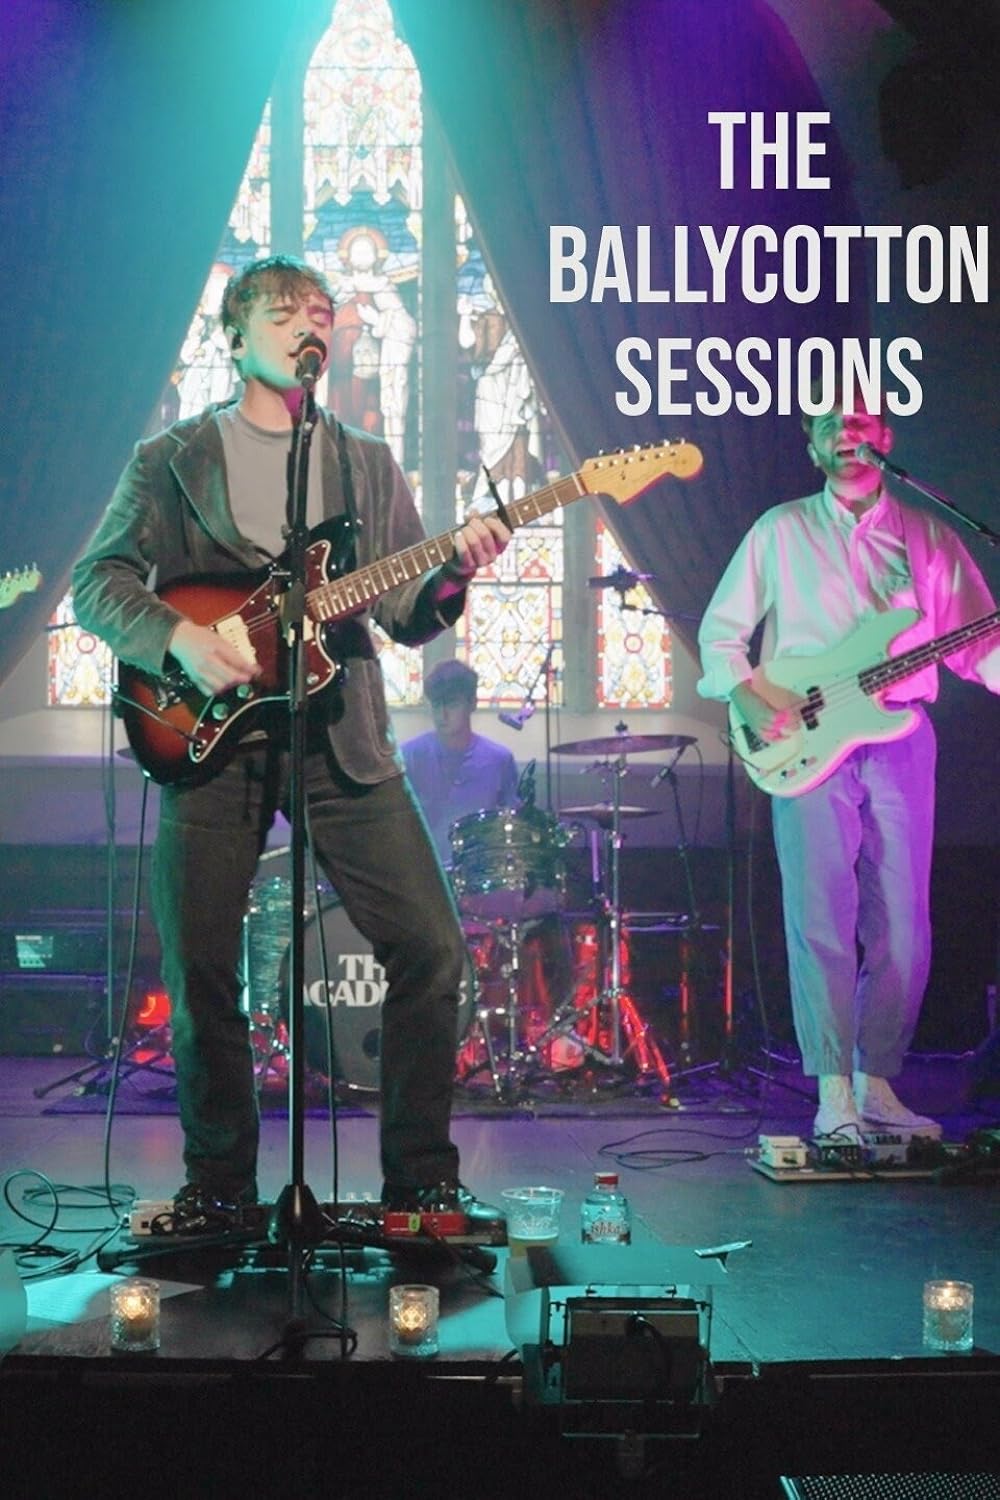 The Ballycotton Sessions